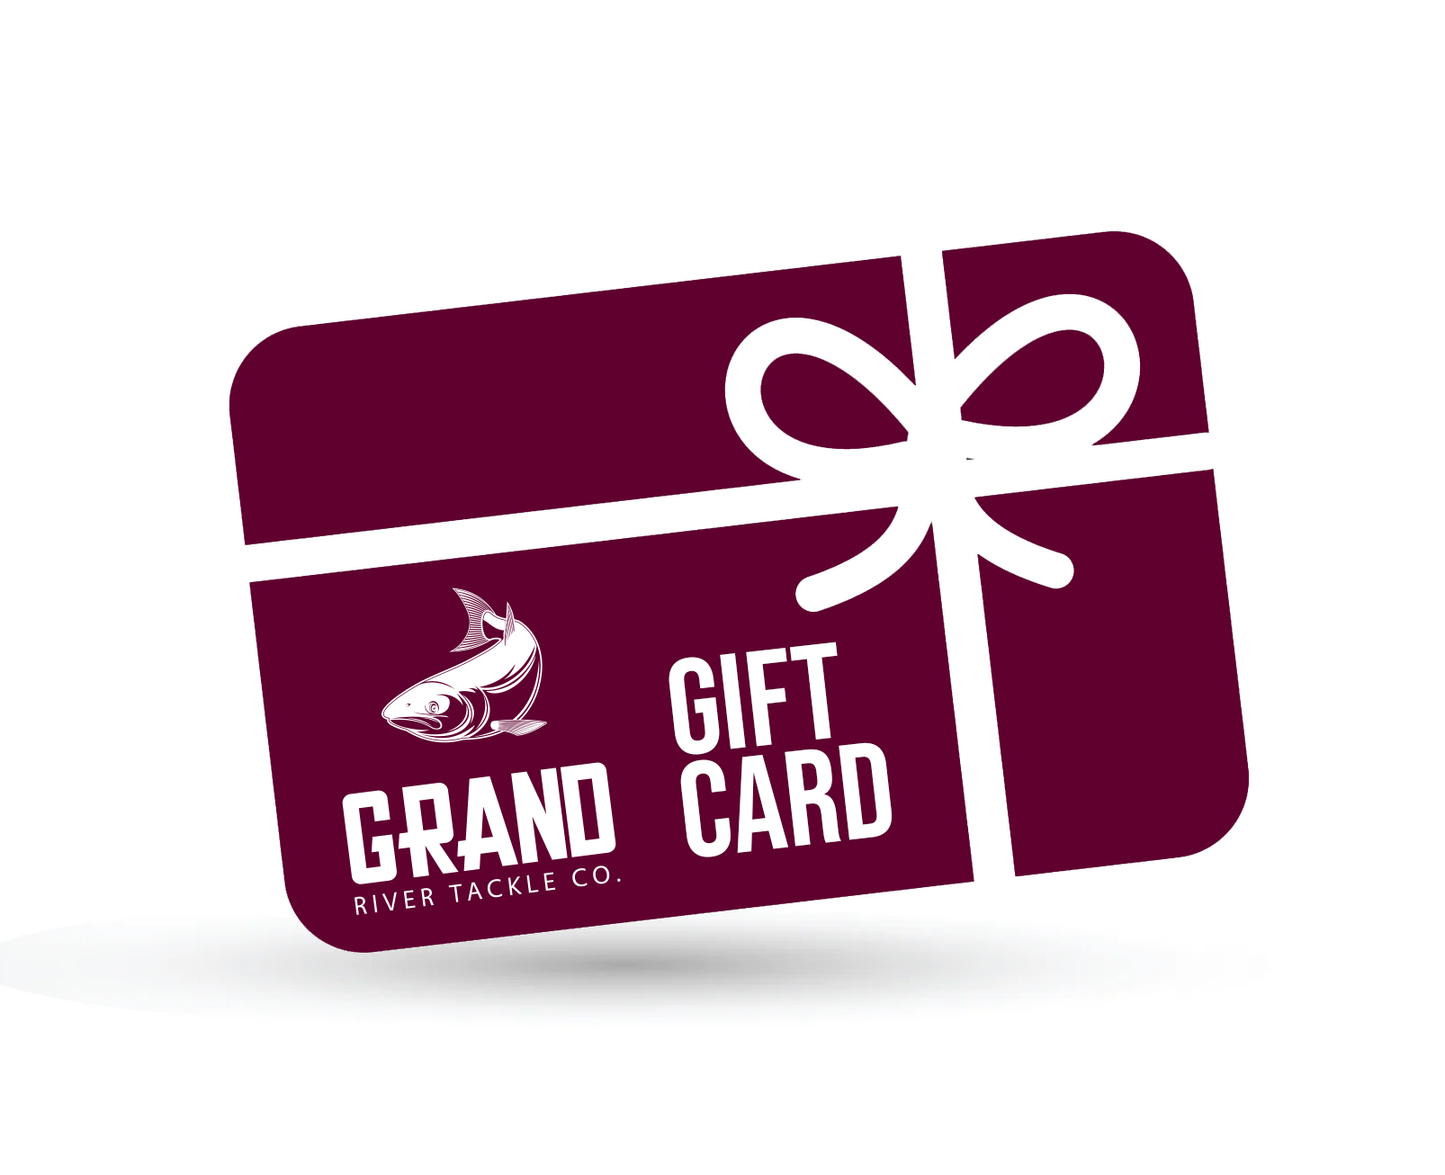 Grand River Tackle Co Gift Card